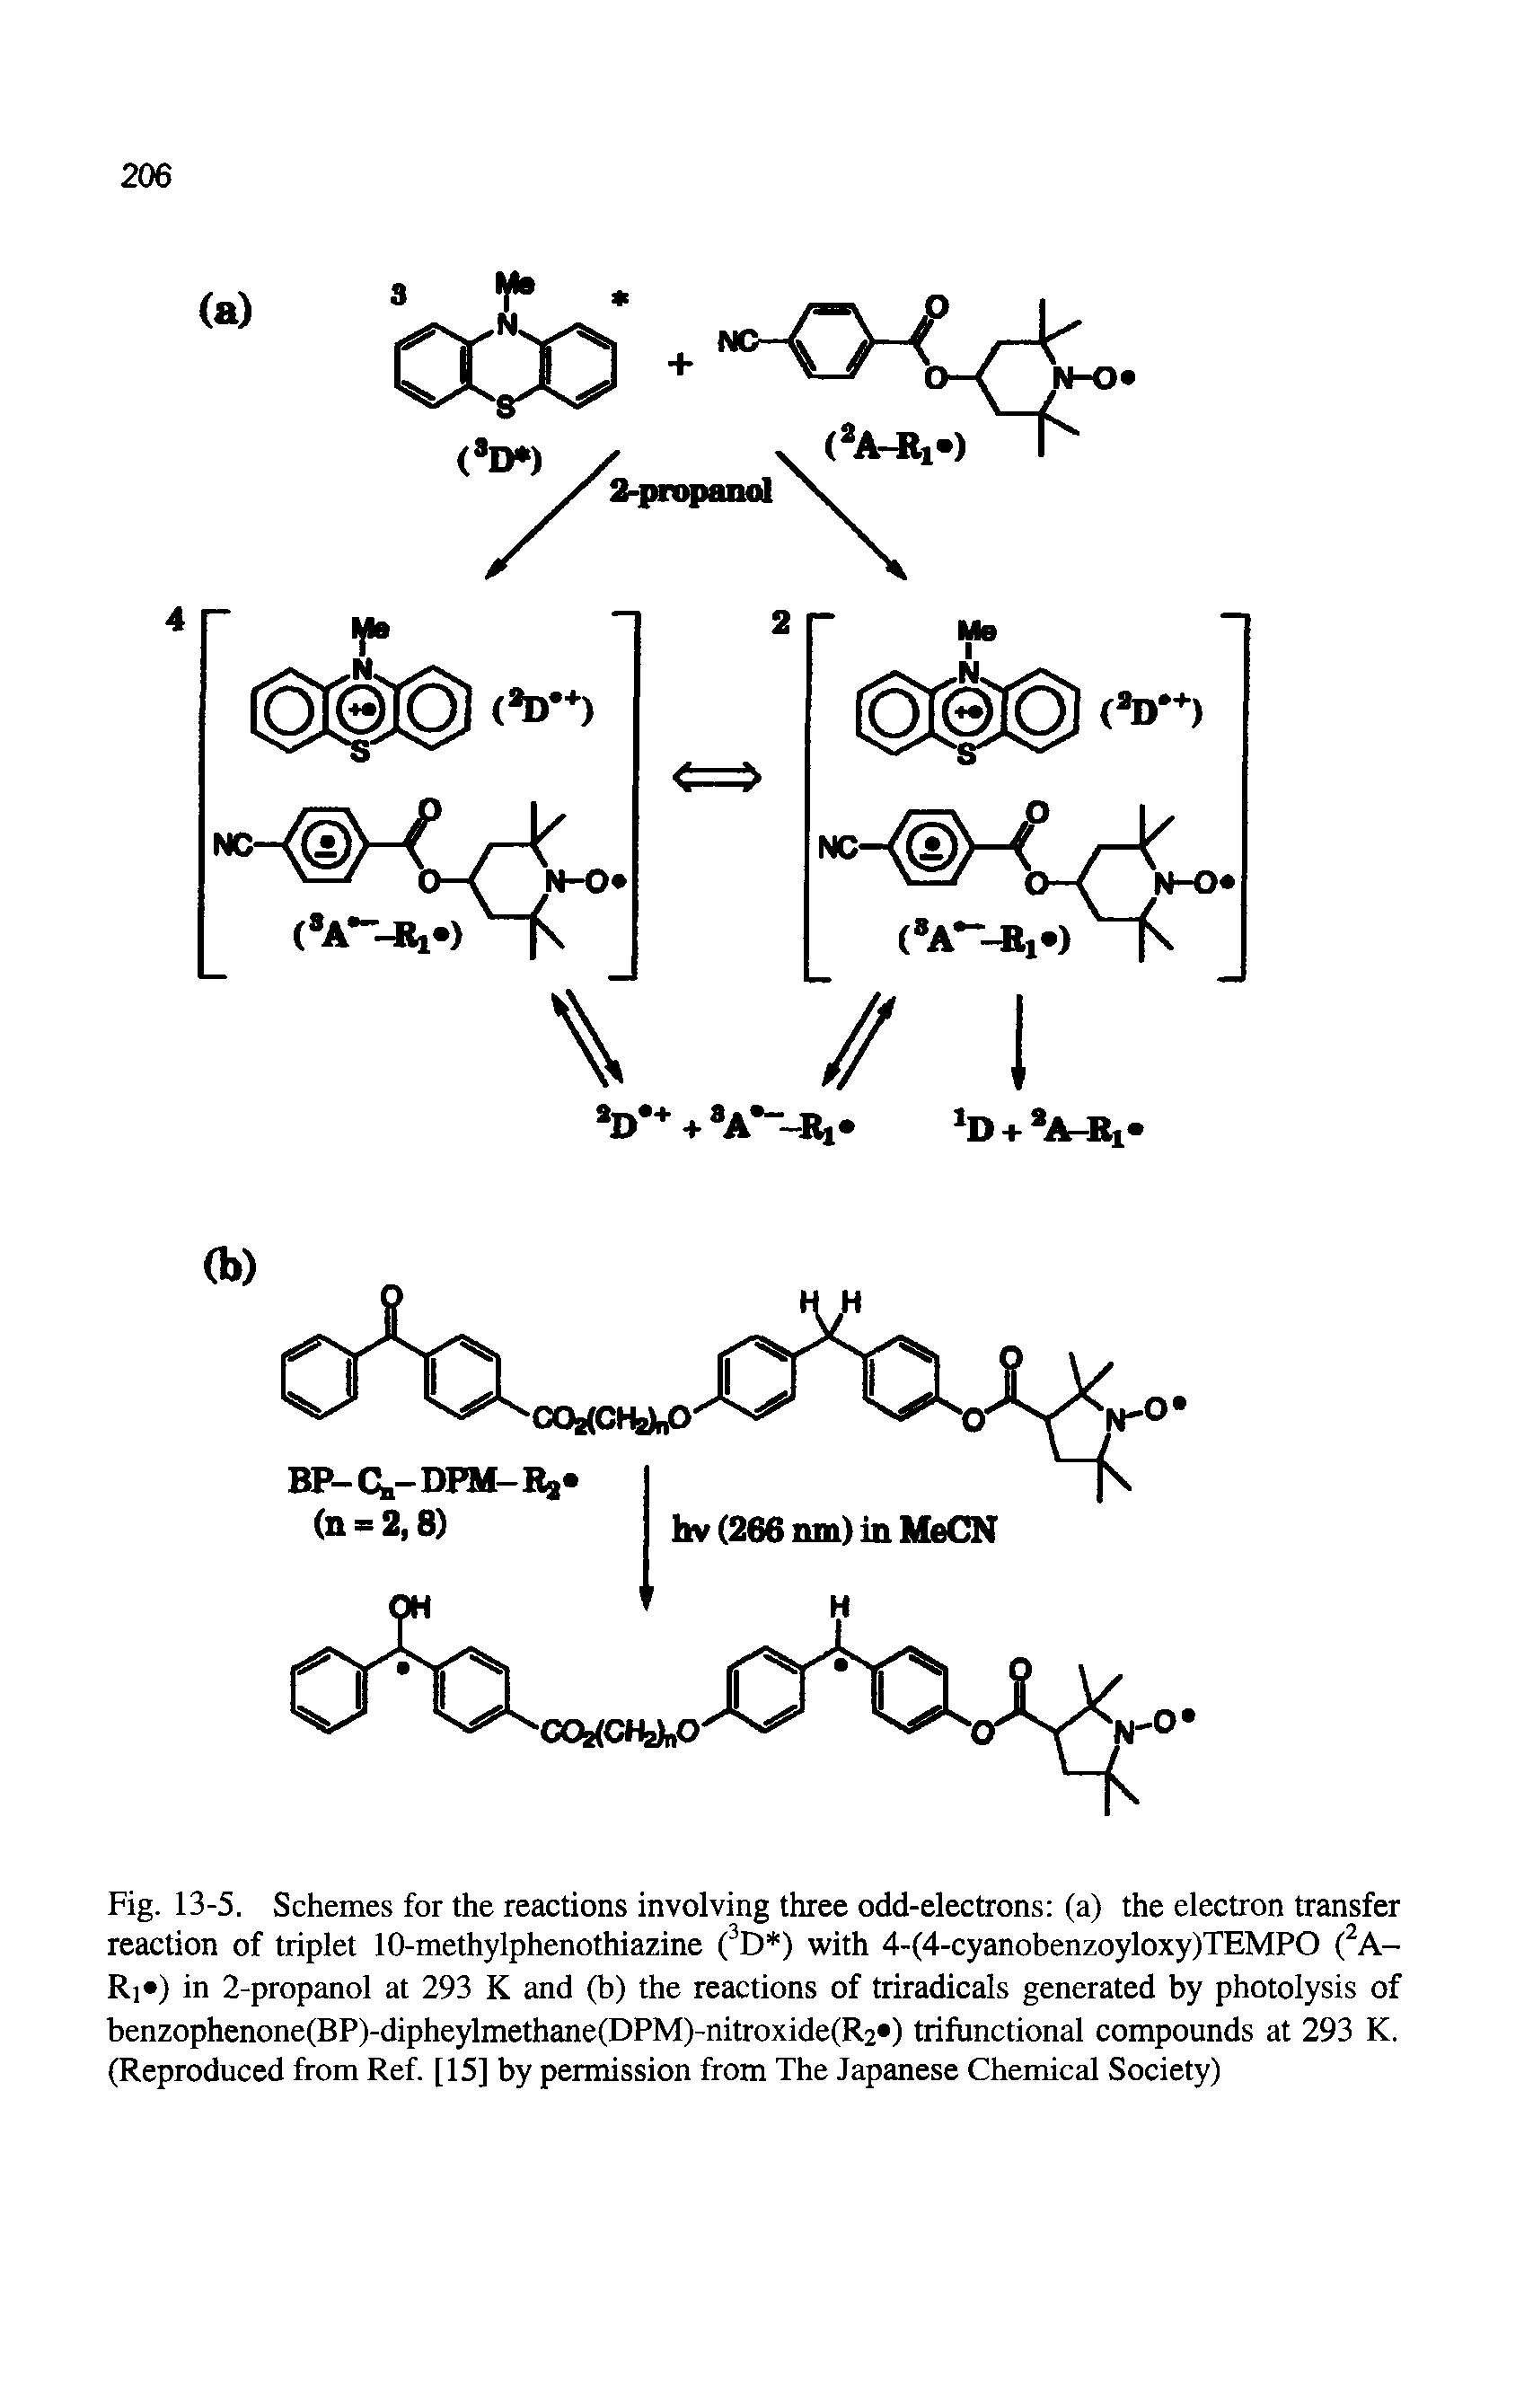 Fig. 13-5. Schemes for the reactions involving three odd-electrons (a) the electron transfer reaction of triplet 10-methylphenothiazine ( D ) with 4-(4-cyanobenzoyloxy)TEMPO ( A-Ri ) in 2-propanol at 293 K and (b) the reactions of triradicals generated by photolysis of benzophenone(BP)-dipheylmethane(DPM)-nitroxide(R2 ) trifunctional compounds at 293 K. (Reproduced from Ref. [15] by permission from The Japanese Chemical Society)...